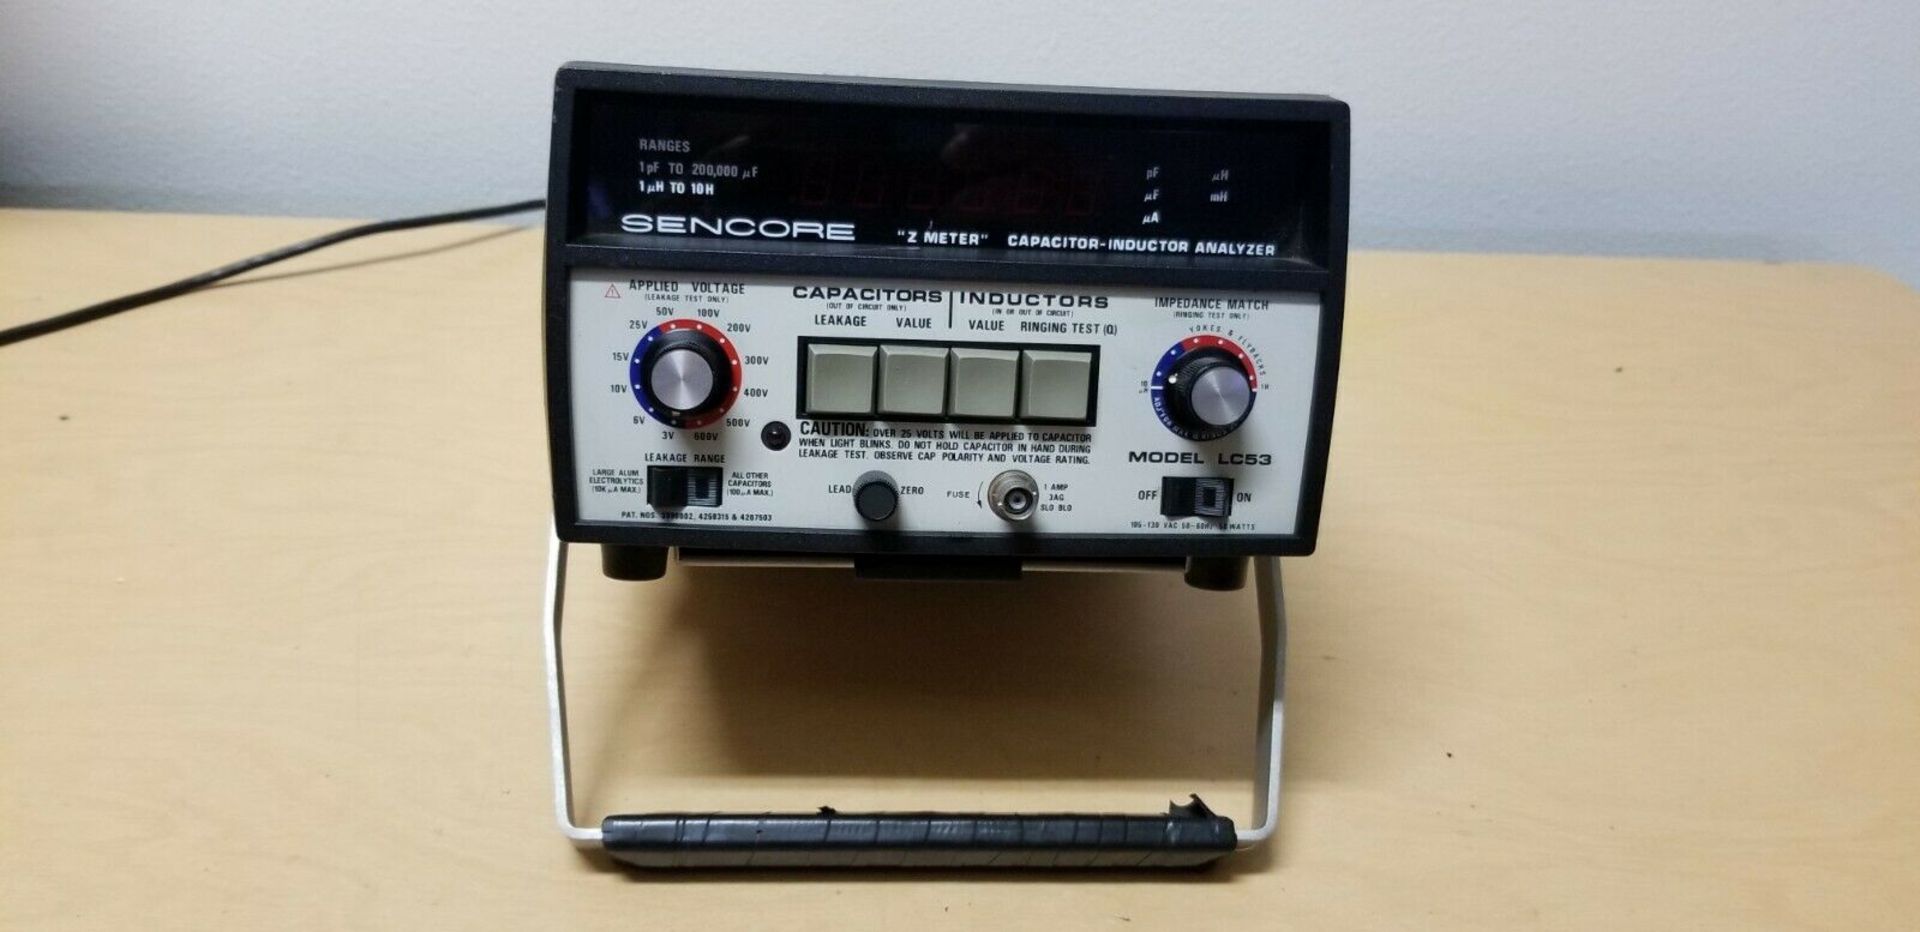 Sencore Capacitor-Inductor Analyzer Z Meter LC53